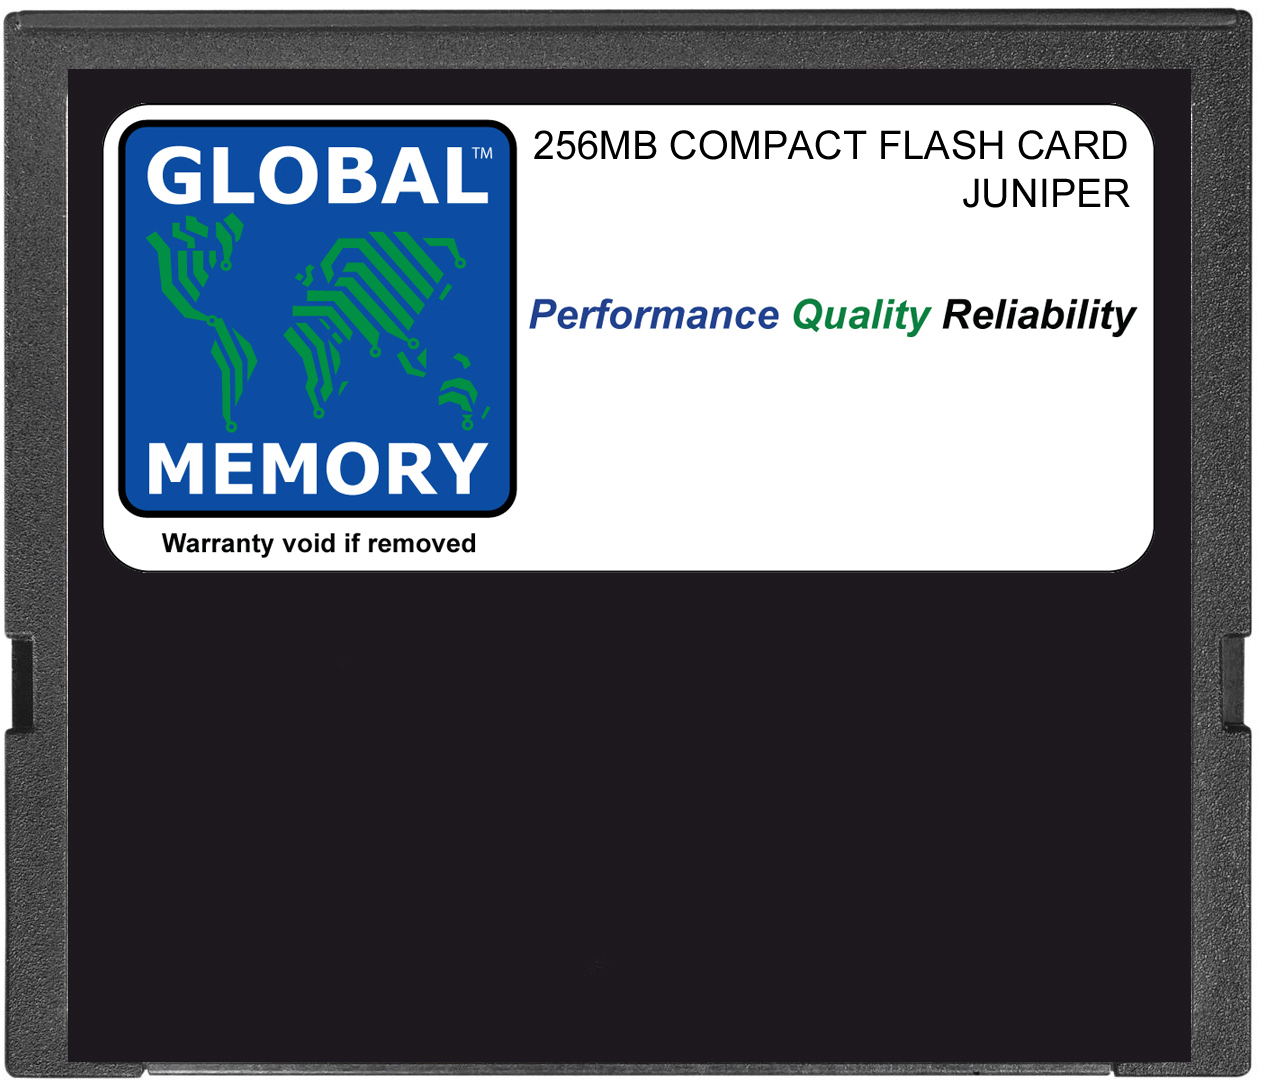 256MB COMPACT FLASH CARD MEMORY FOR JUNIPER J2300 / J4300 / J6300 SERIES ROUTERS (JX-CF-256M-S) - Click Image to Close